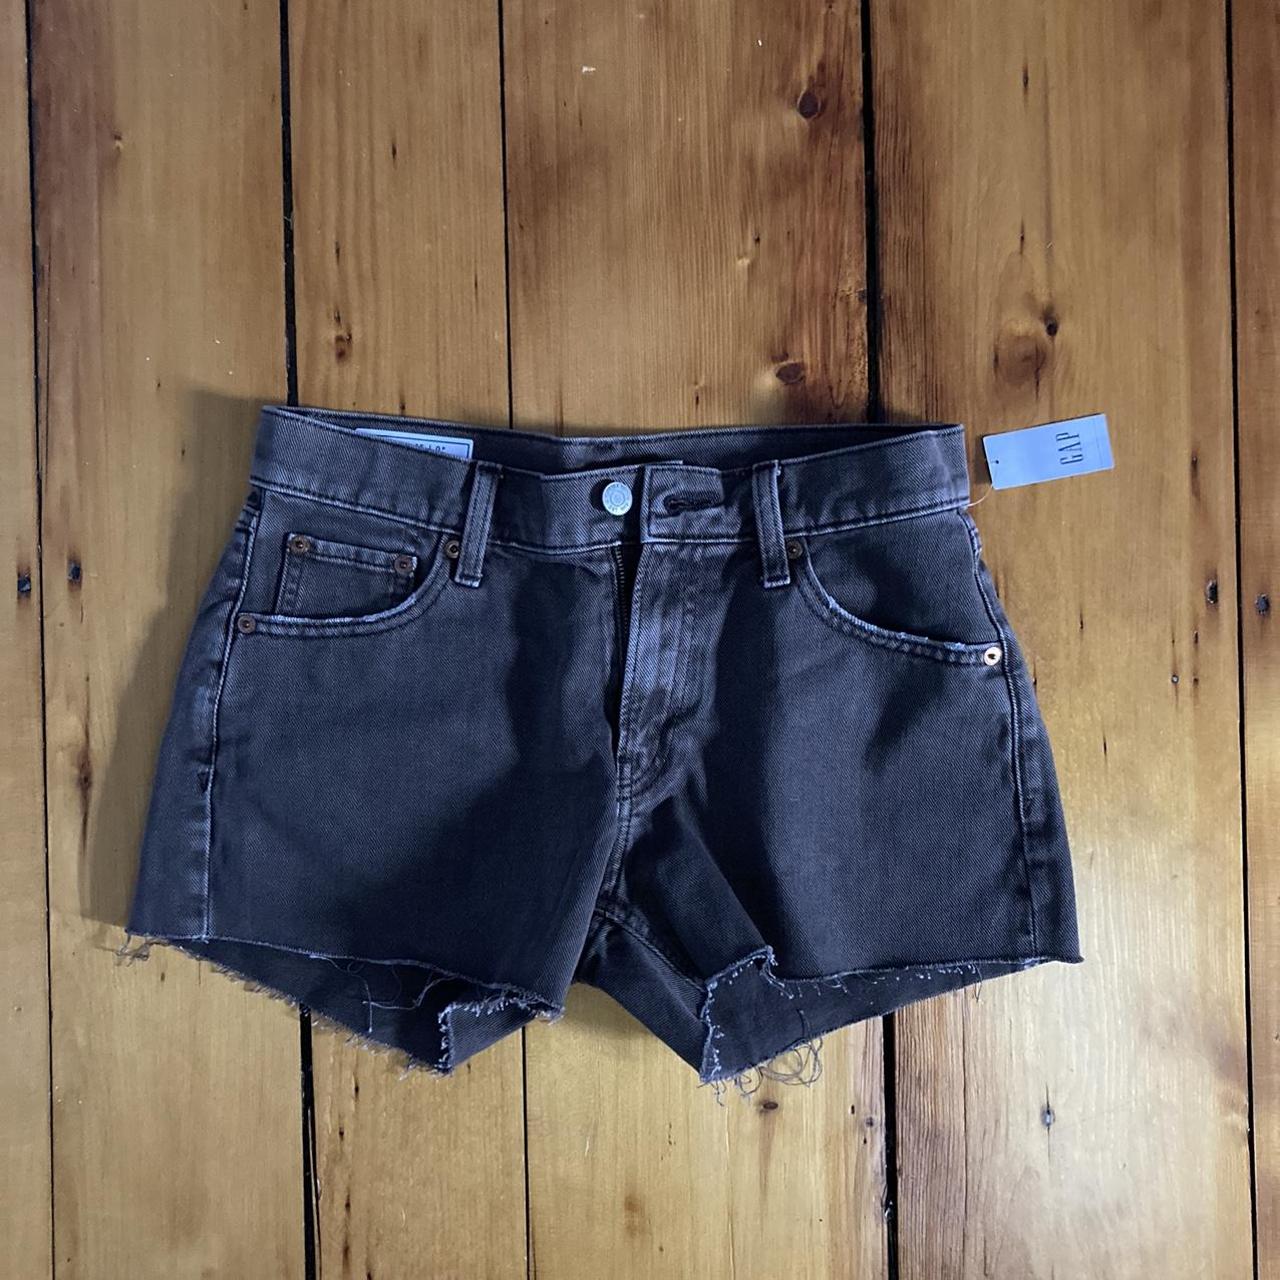 Low rise brown jean shorts Chocolate brown, perfect... - Depop